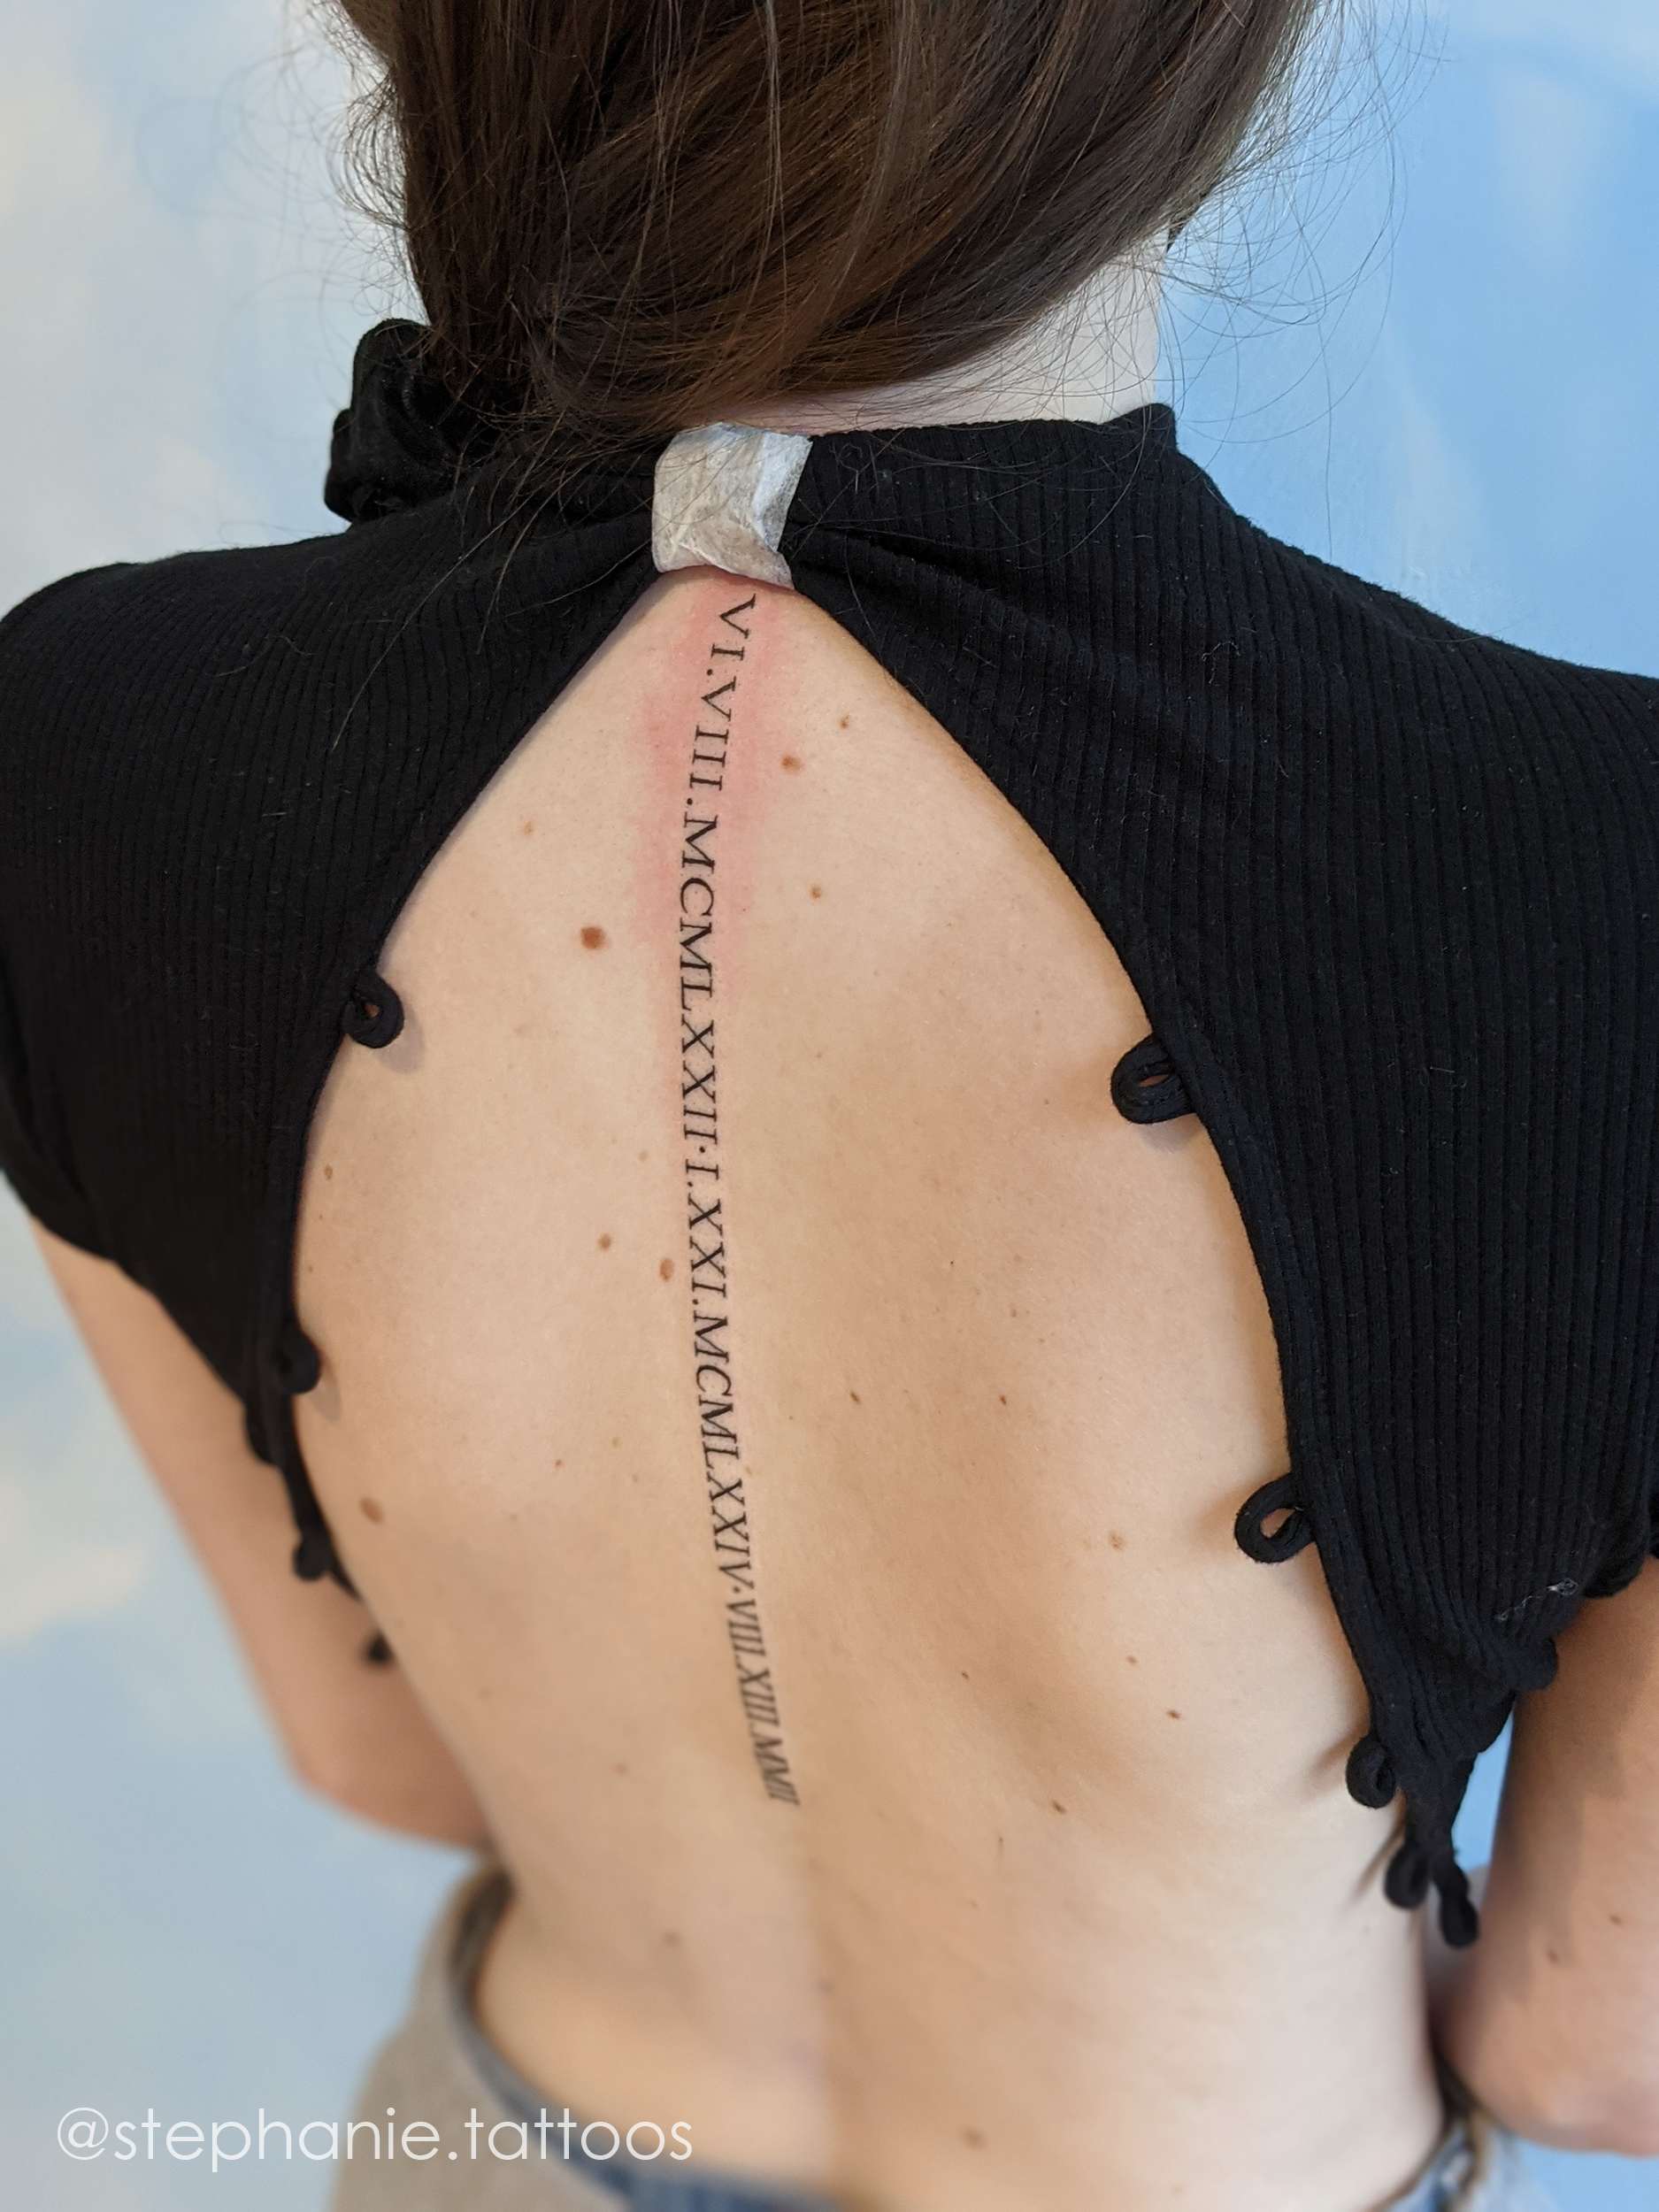 Scoliosis Surgery What Scars And Recovery Look Like From A Real Patients  Point Of View